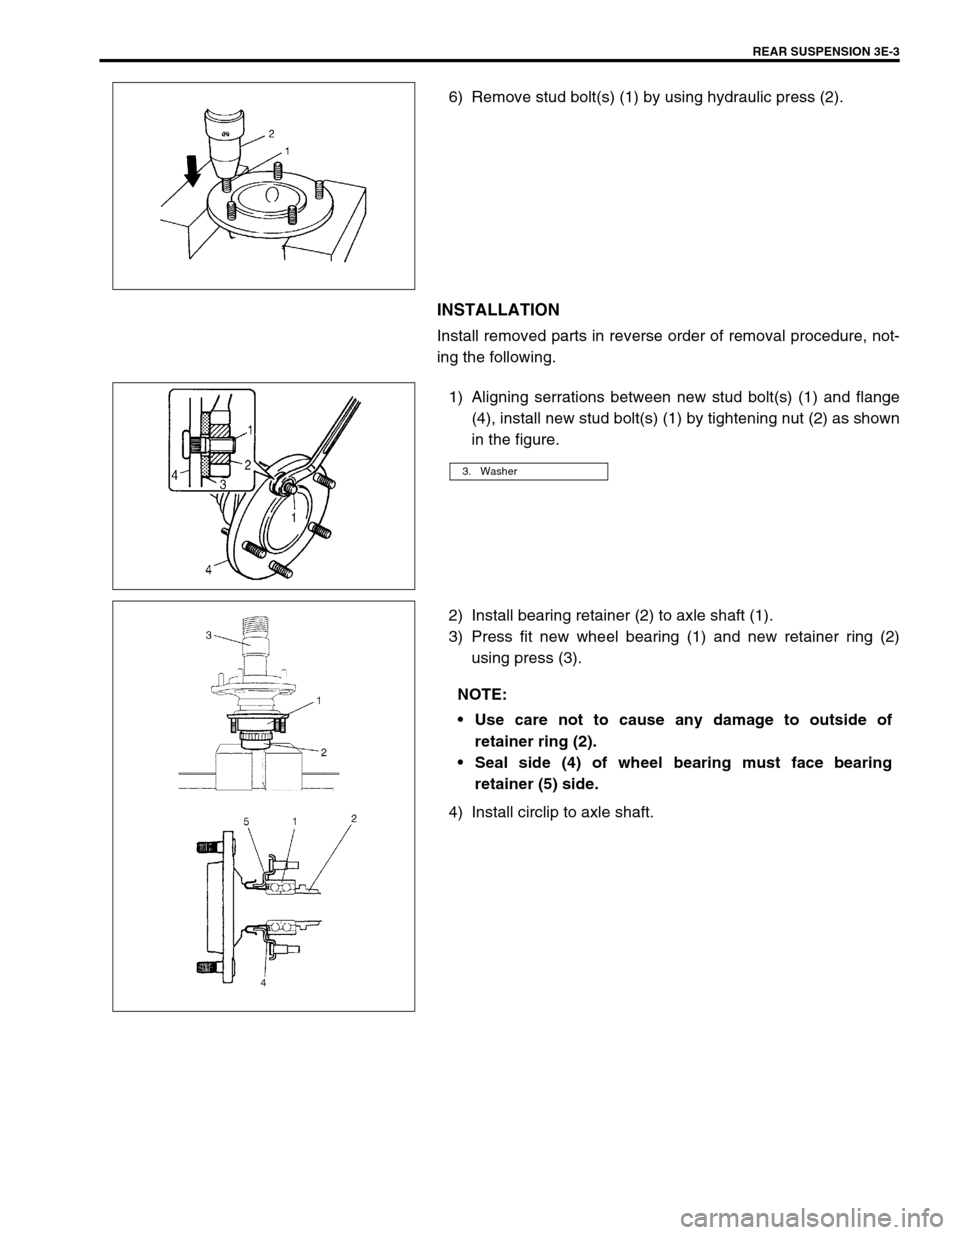 SUZUKI GRAND VITARA 1999 2.G Owners Manual REAR SUSPENSION 3E-3
6) Remove stud bolt(s) (1) by using hydraulic press (2).
INSTALLATION
Install removed parts in reverse order of removal procedure, not-
ing the following.
1) Aligning serrations b